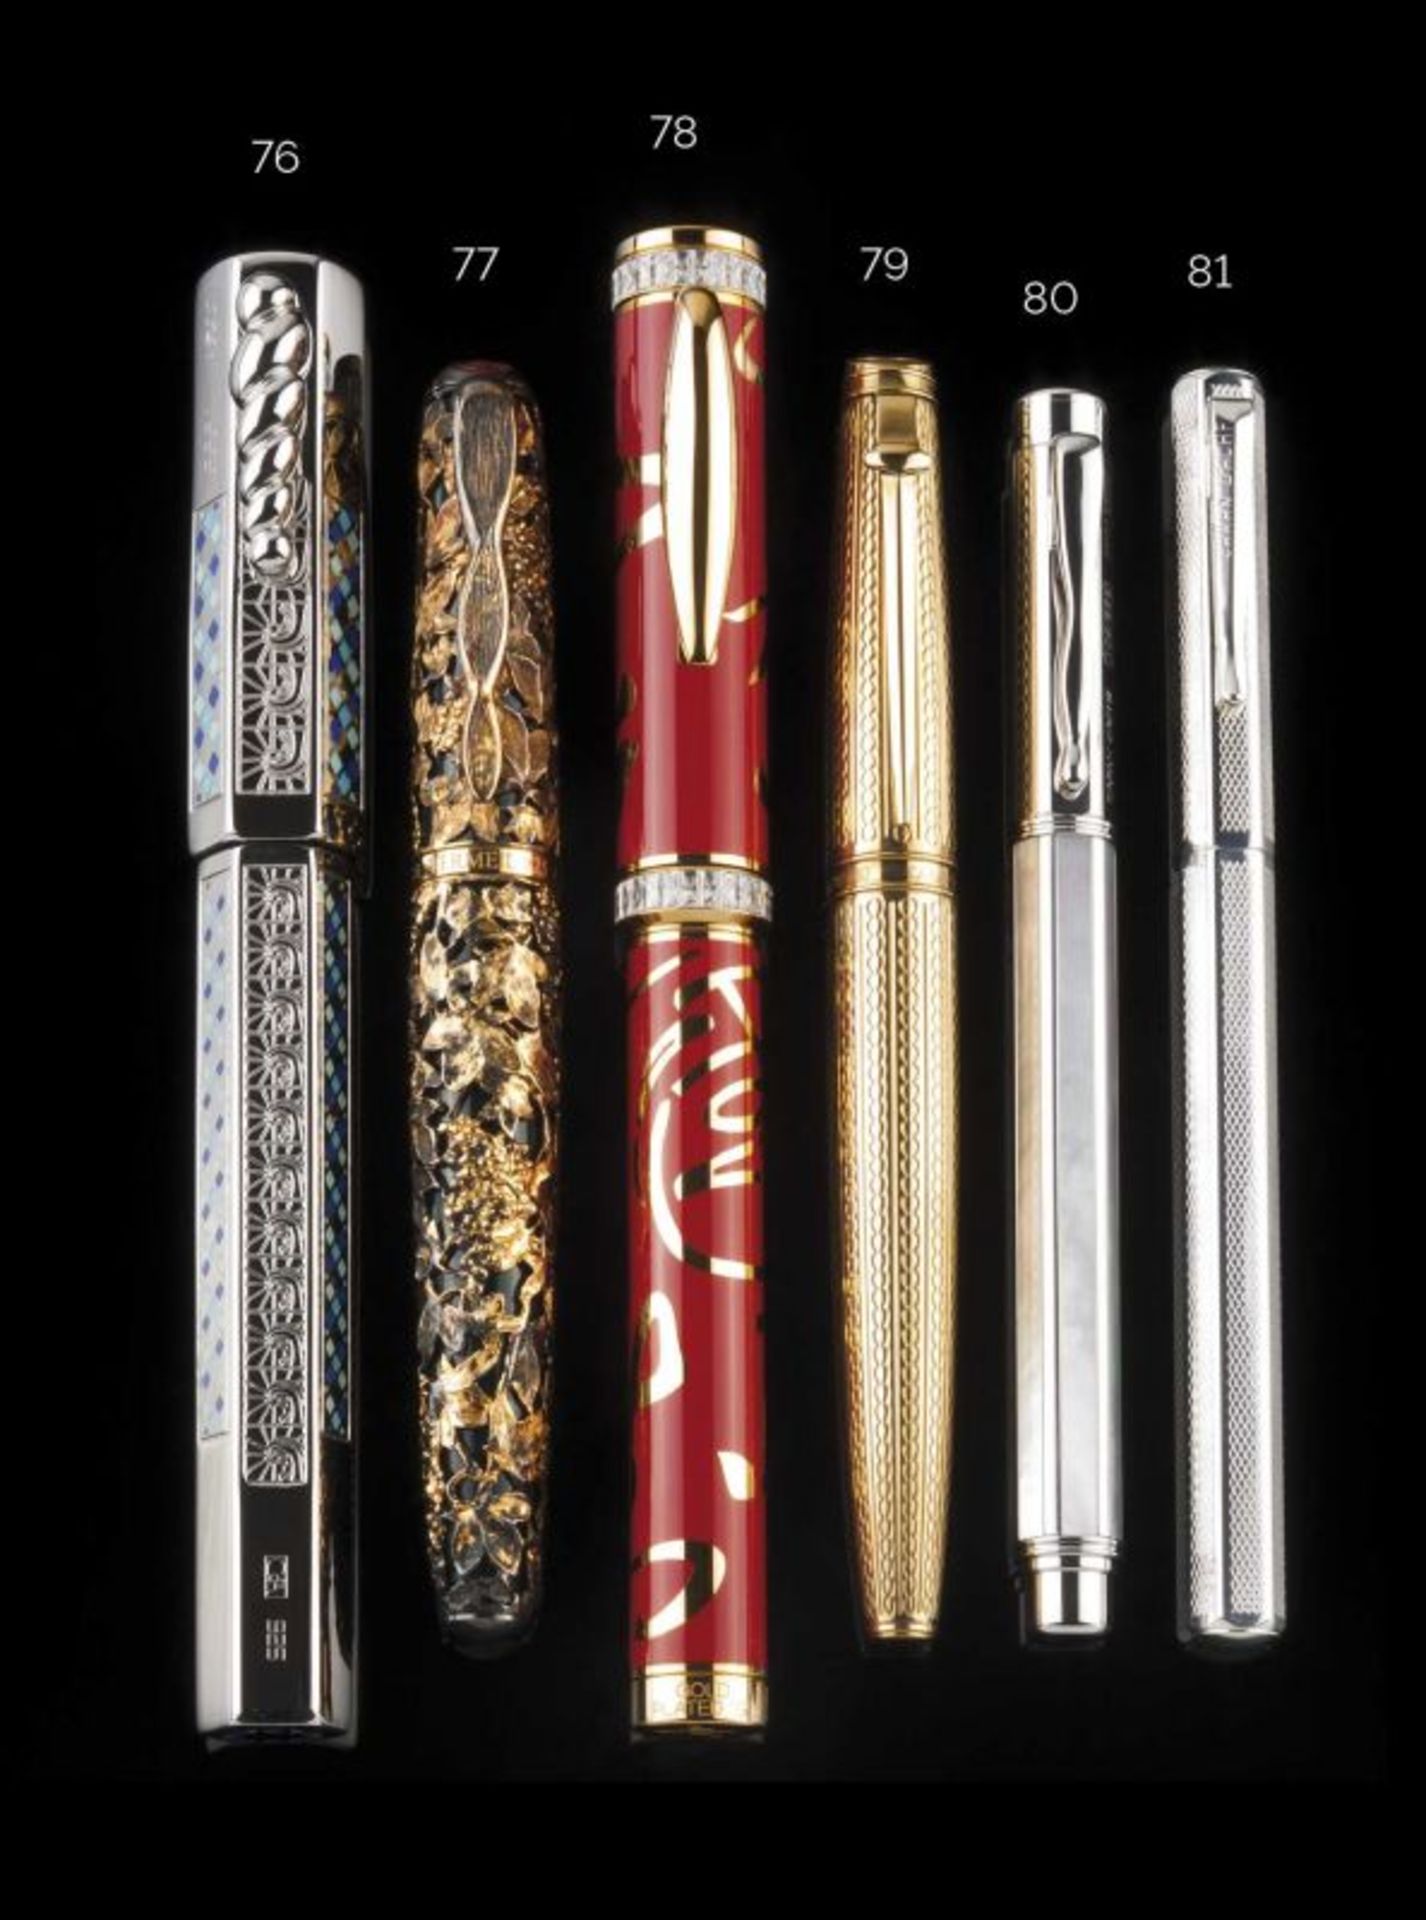 Caran d'Ache Colletion Privé Gold plated with guilloche decoration 1994, limited edition 1537/2000